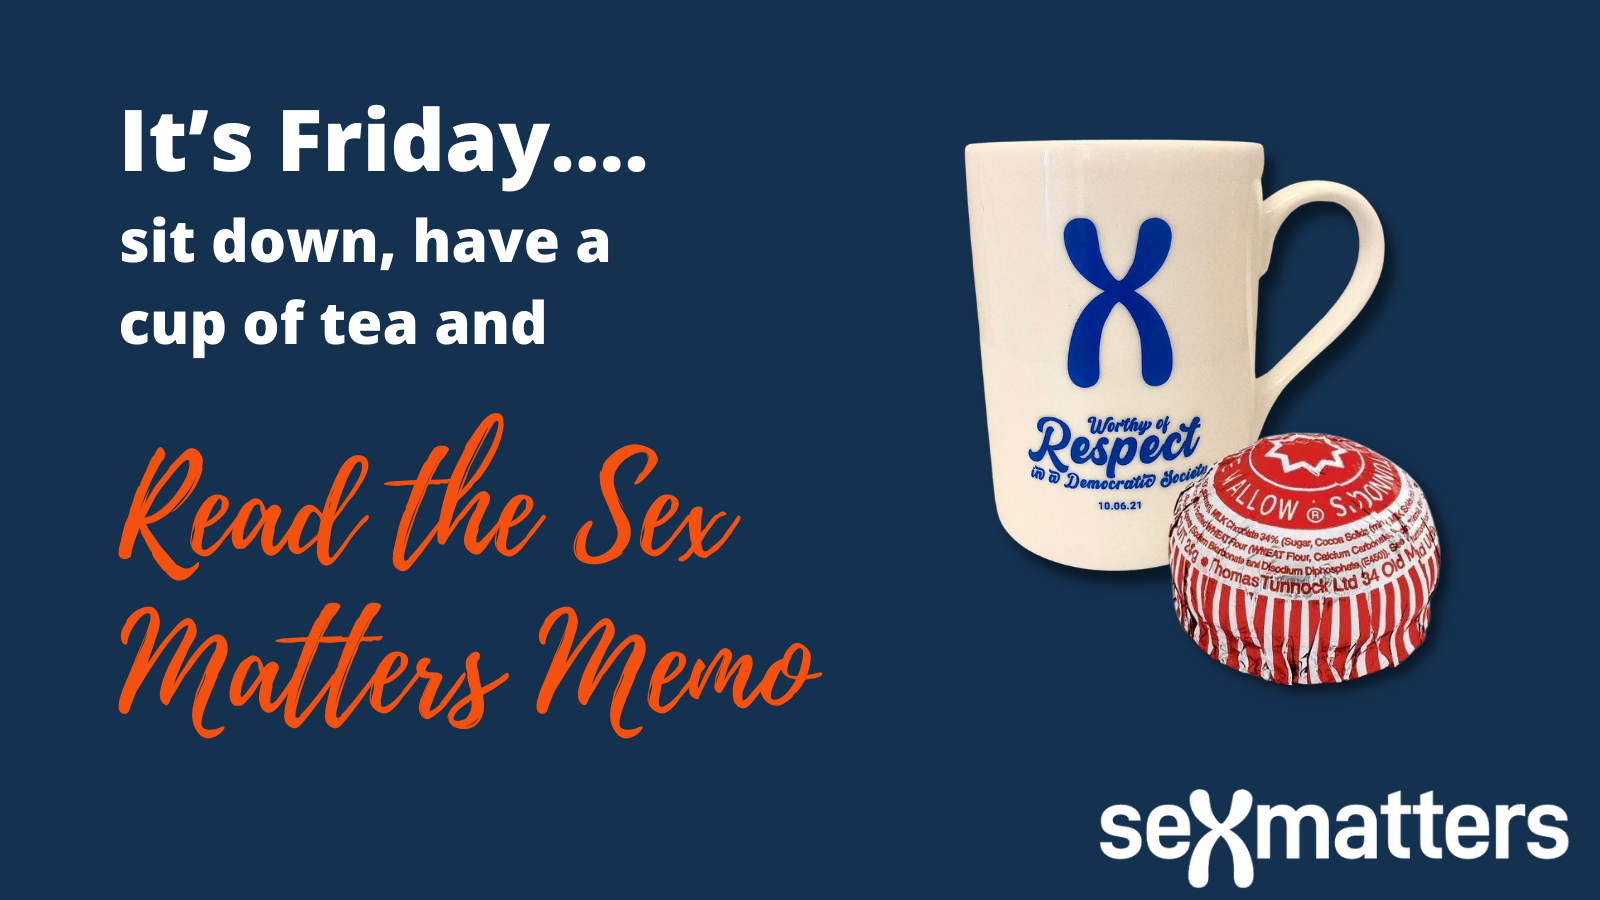 It’s Friday.... sit down, have a cup of tea and read the Sex Matters Memo